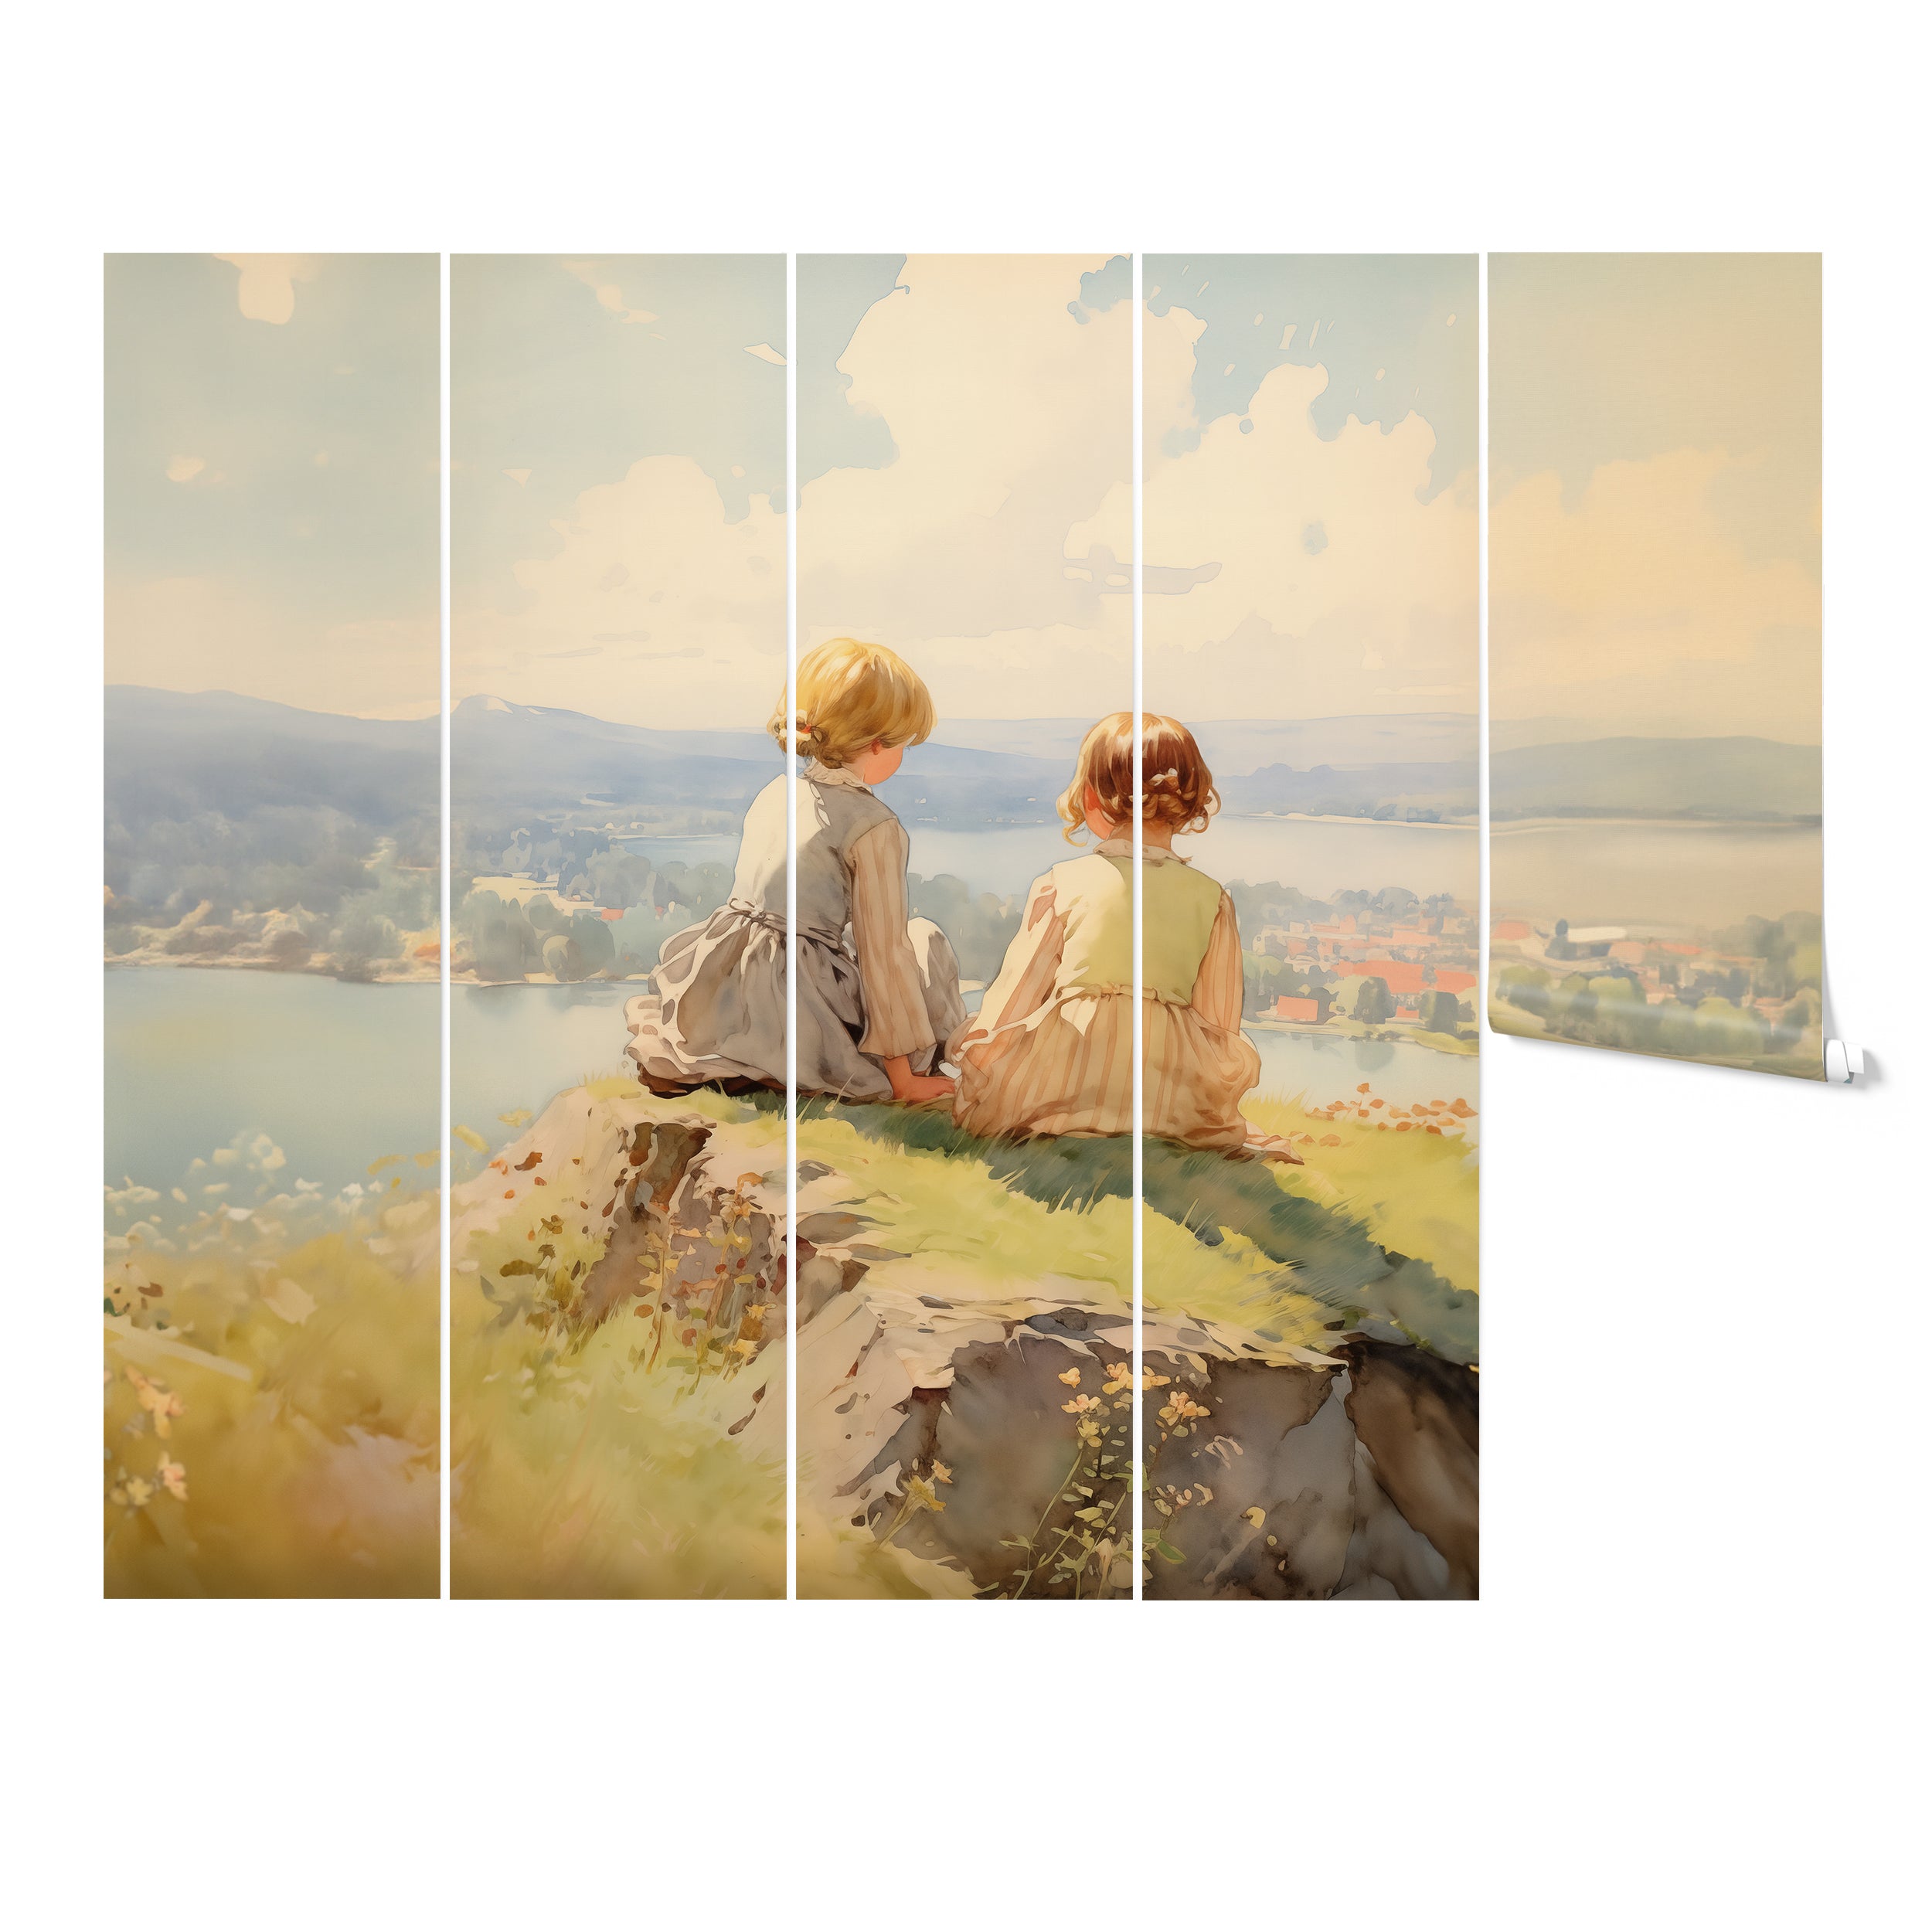 Segmented wall panels of river bend mural featuring two children looking over a scenic valley